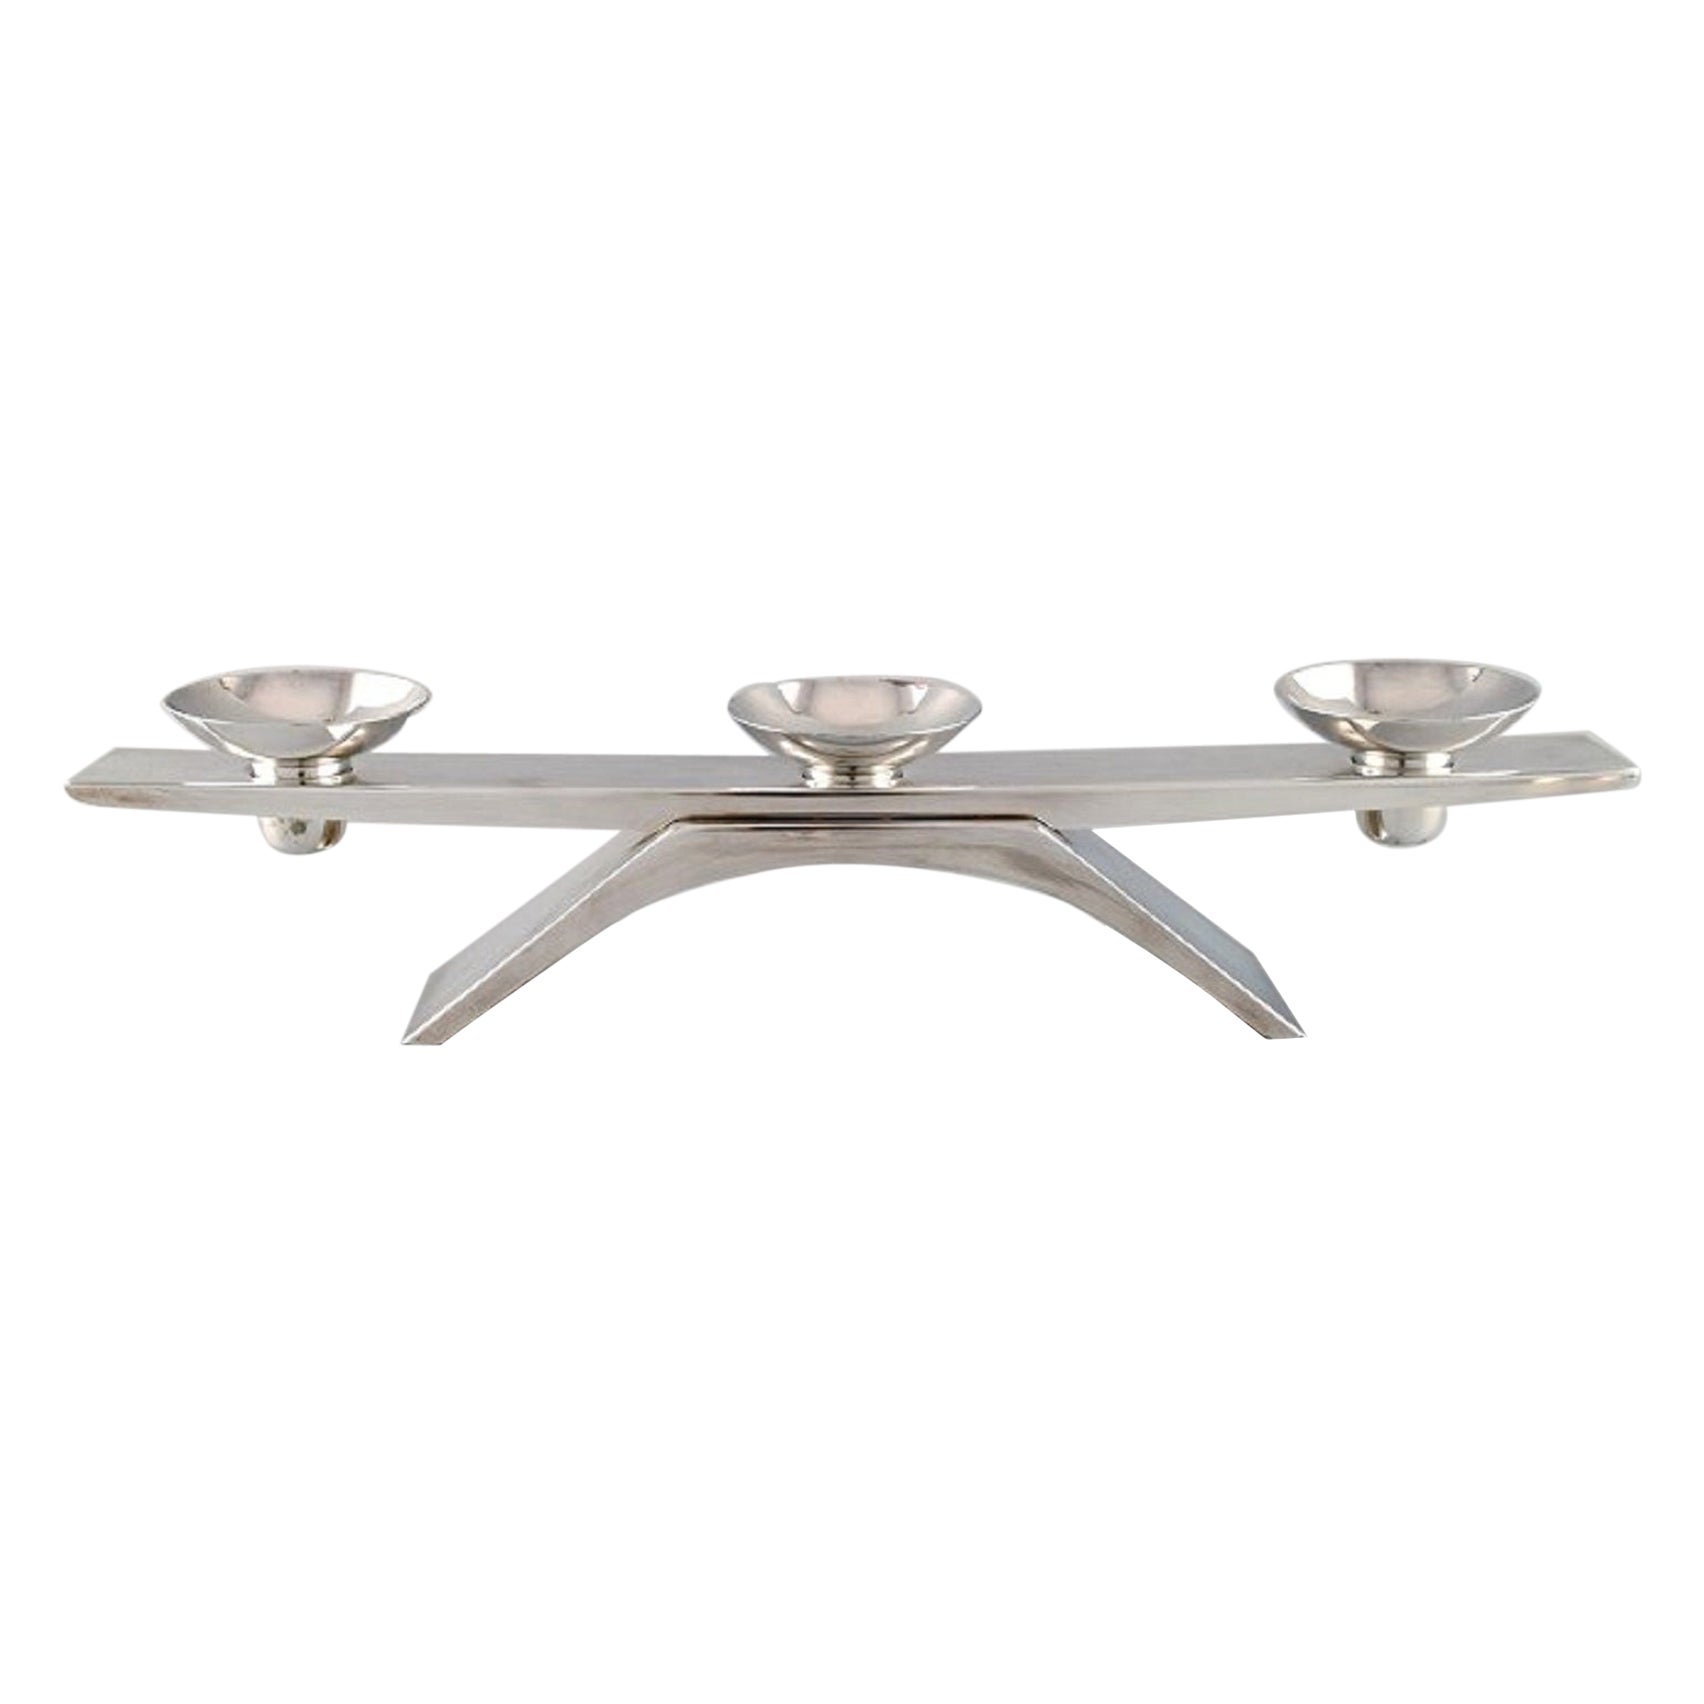 WMF, Germany, Modernist Ikora Candleholder in Plated Silver, Mid-20th Century